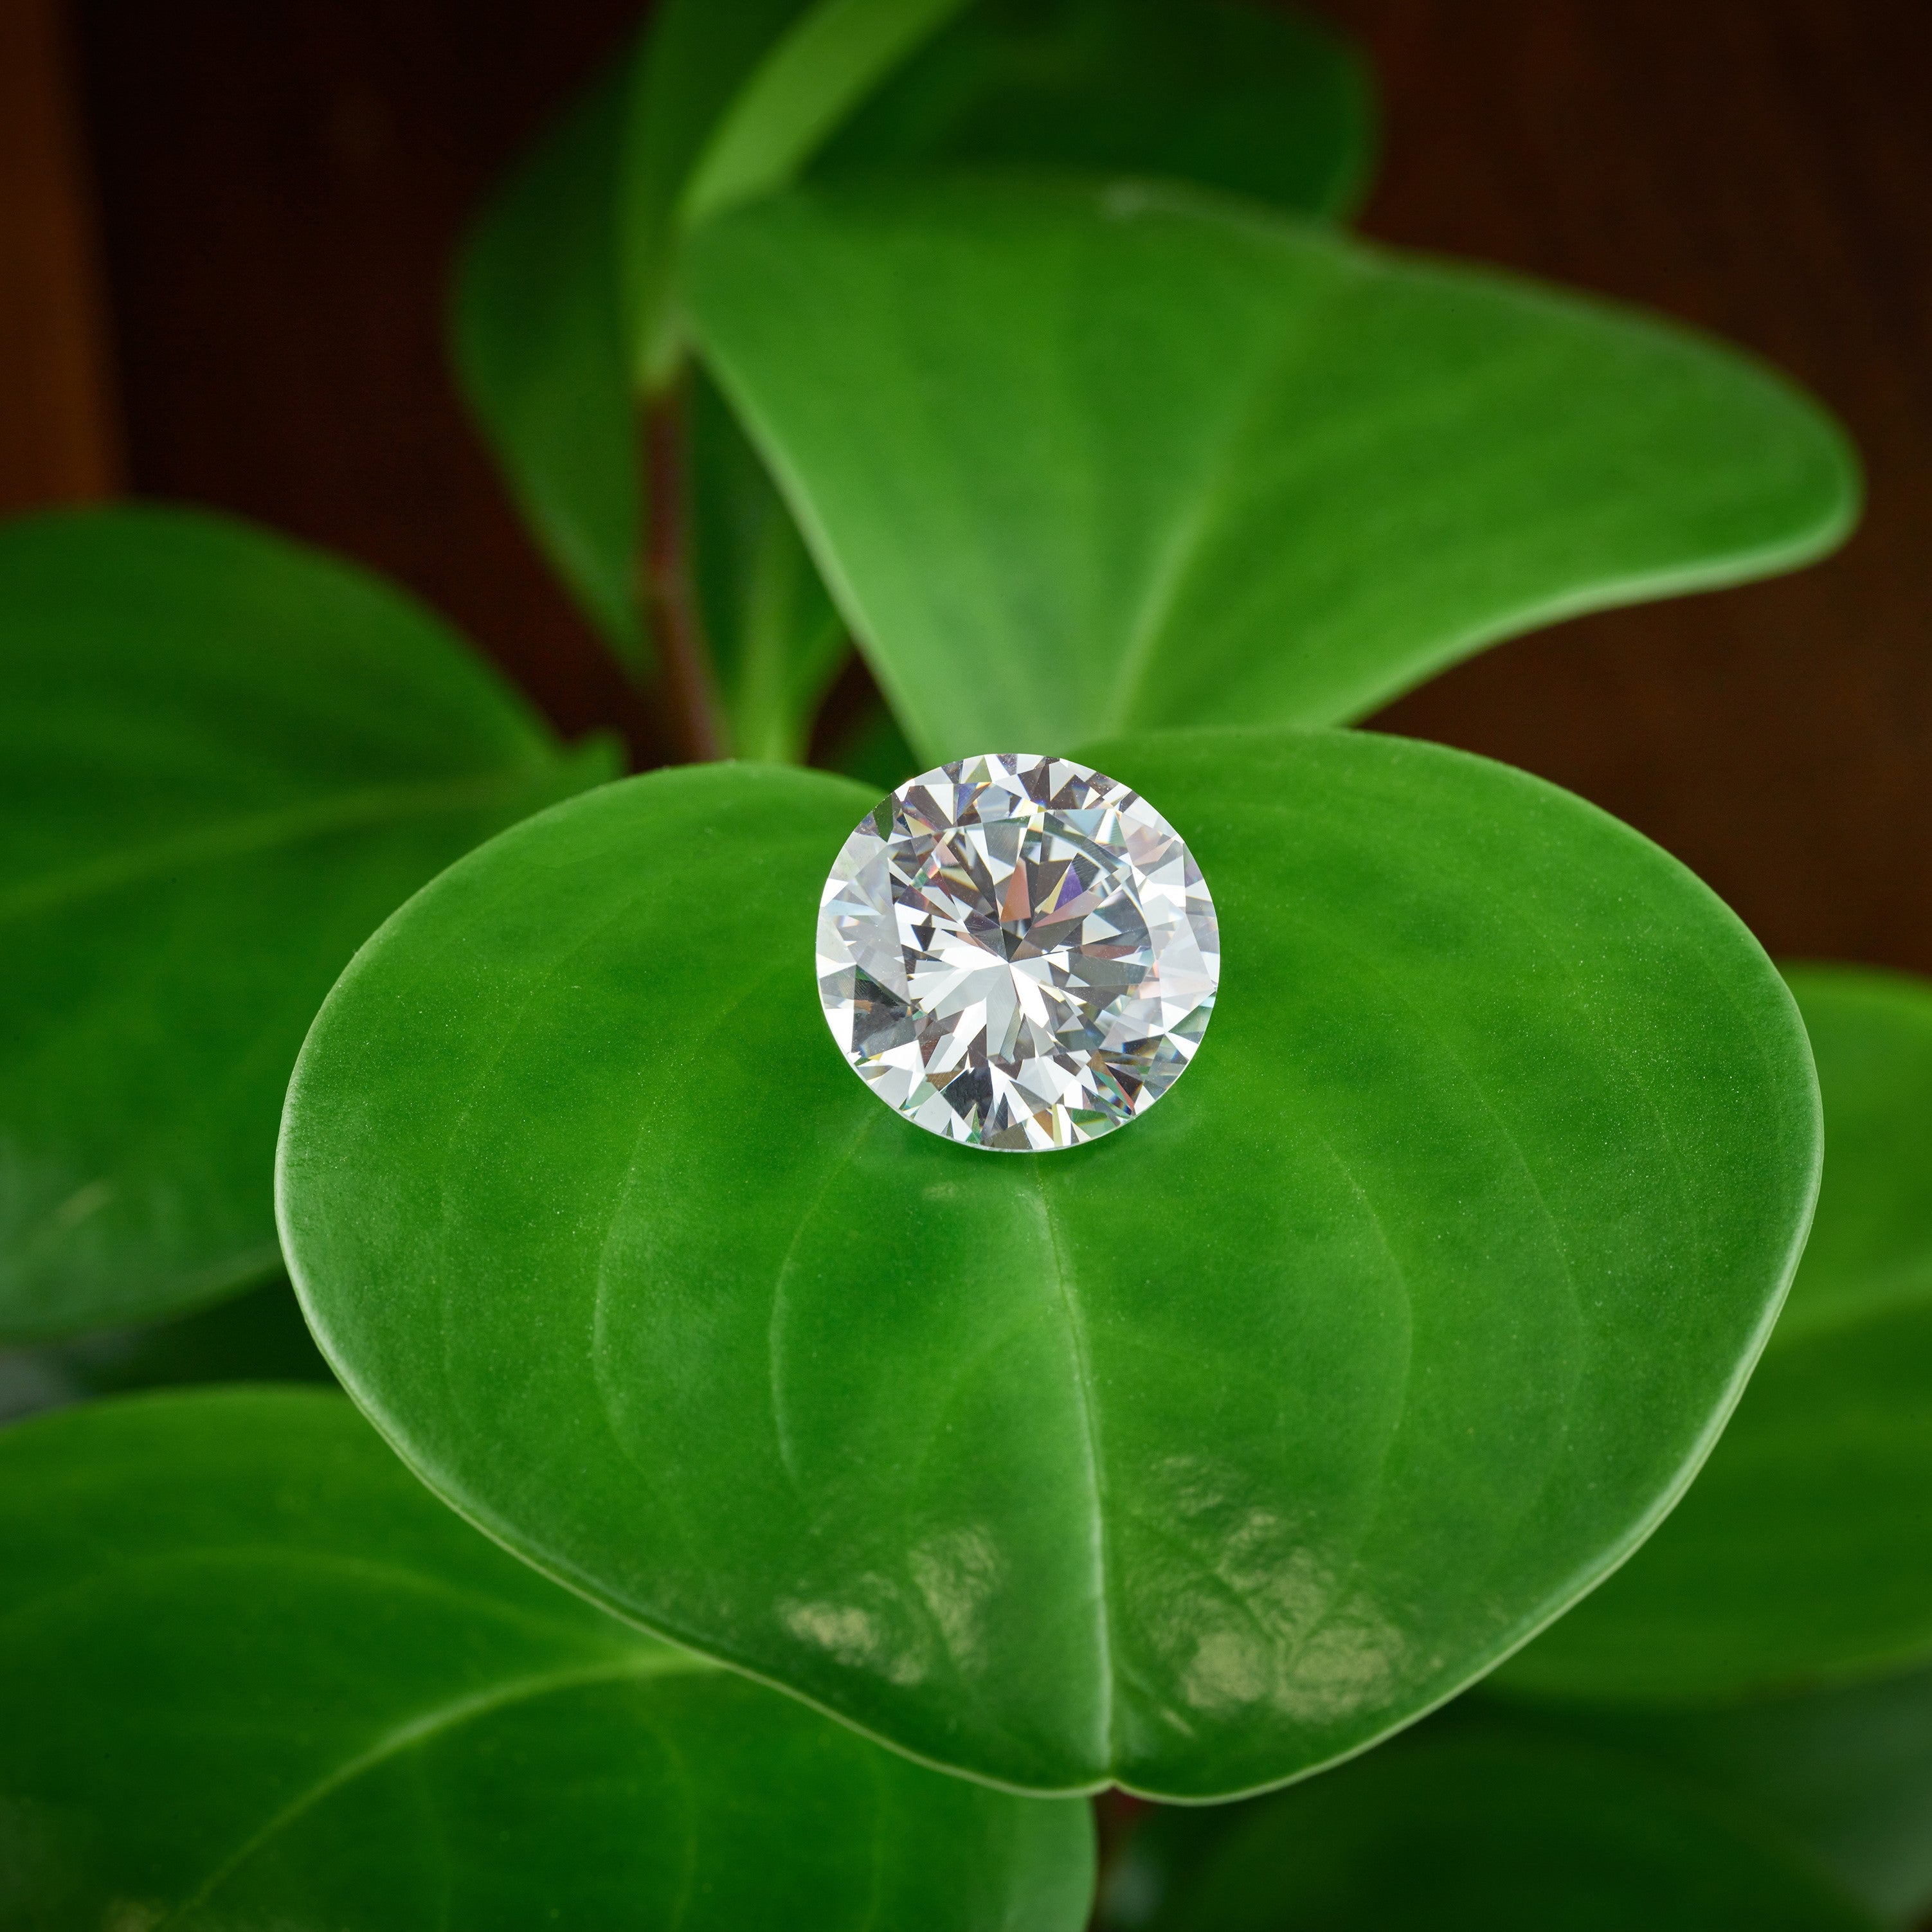 What is a Lab Grown Diamond? Is it different than natural/mined diamond?